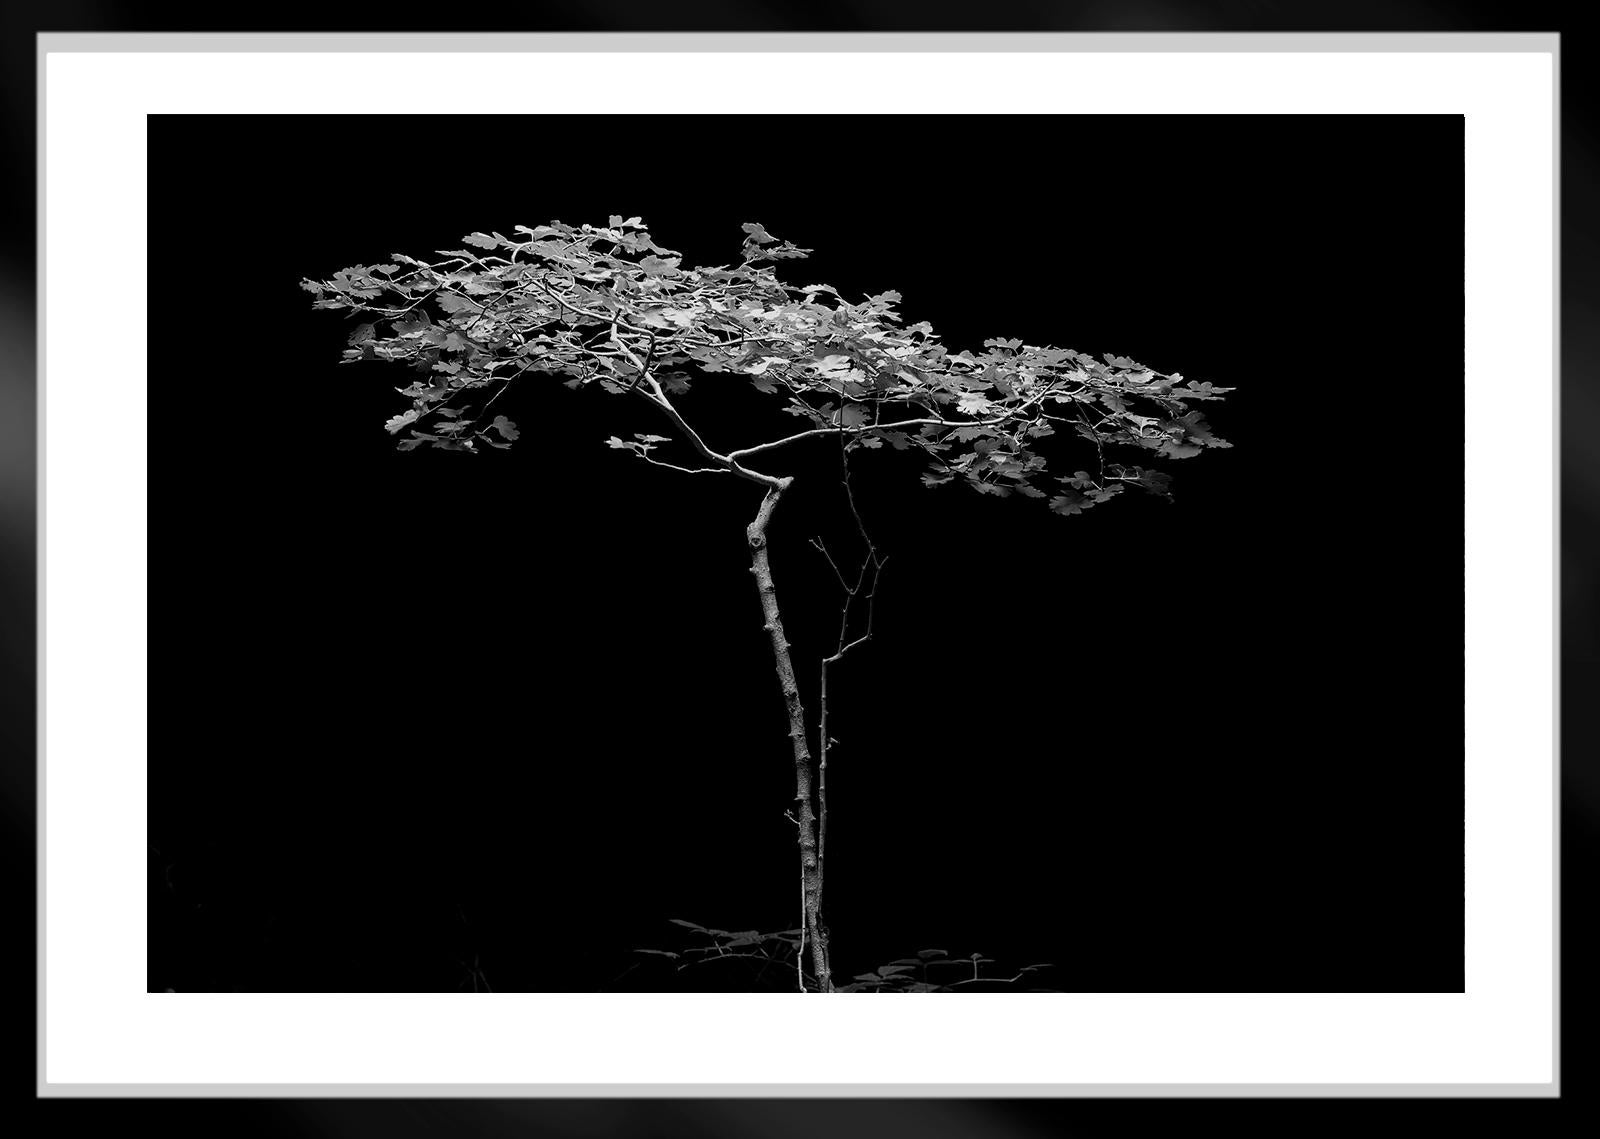 Tree by Ian Sanderson
Signed limited edition archival pigment print, 2006   -  Edition of 5

This is an Archival Pigment print on fiber based paper ( Hahnemühle Photo Rag® Baryta 315 gsm , Acid- and lignin-free paper, Museum quality for highest age